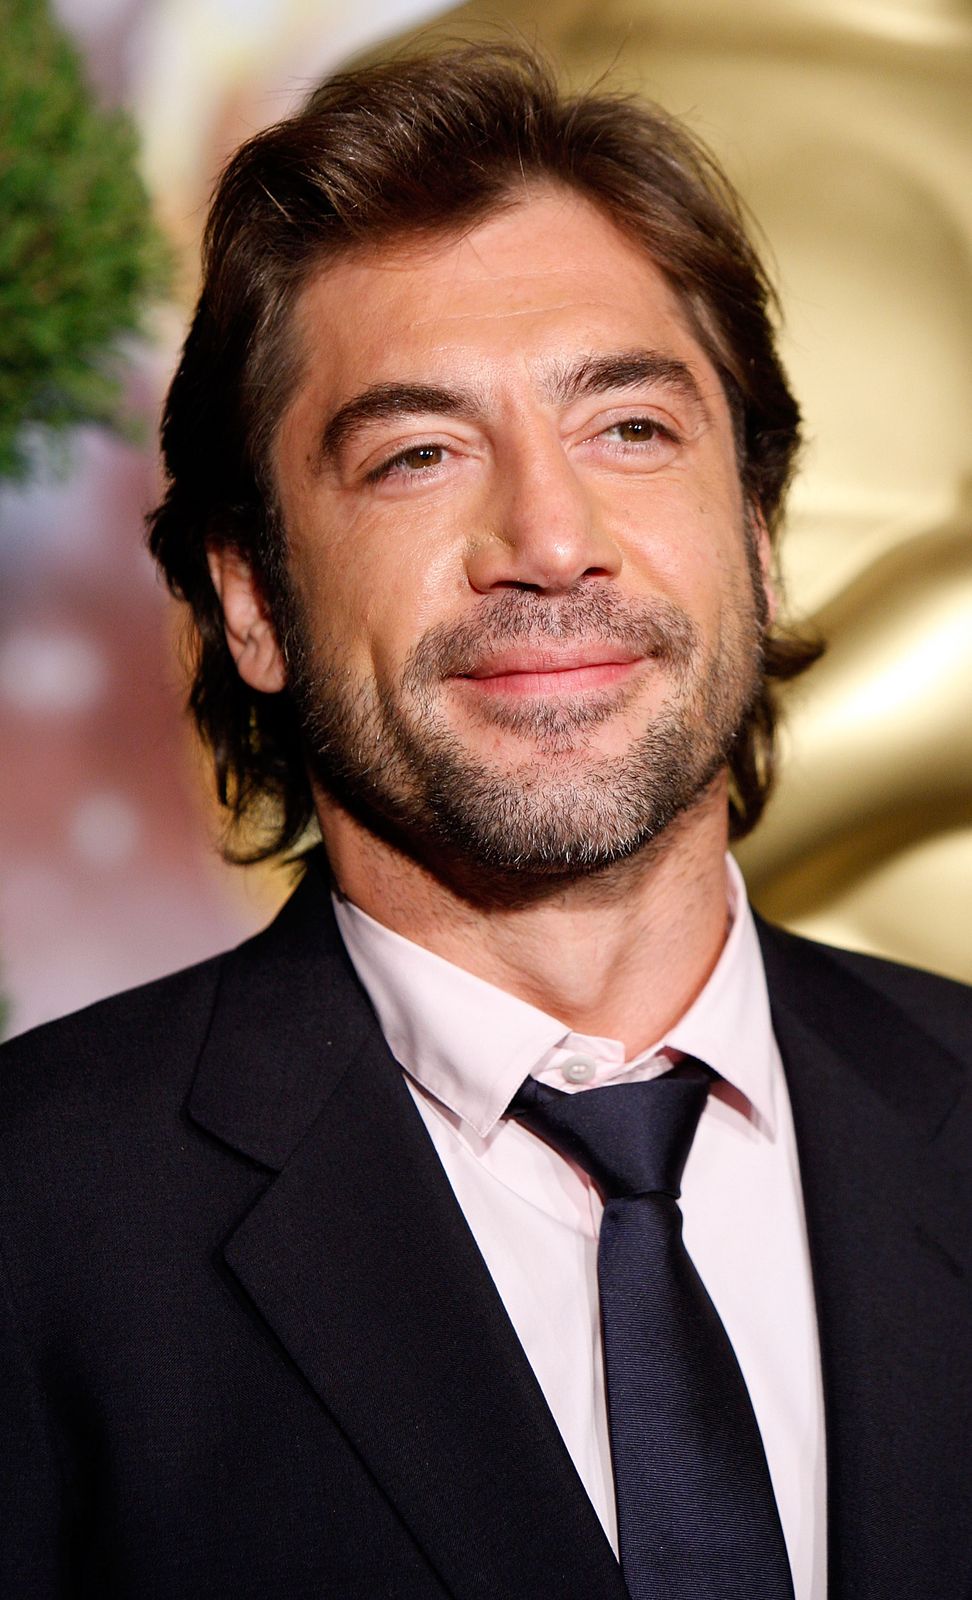 I don't see acting as a career, I see this as an opportunity: Javier Bardem